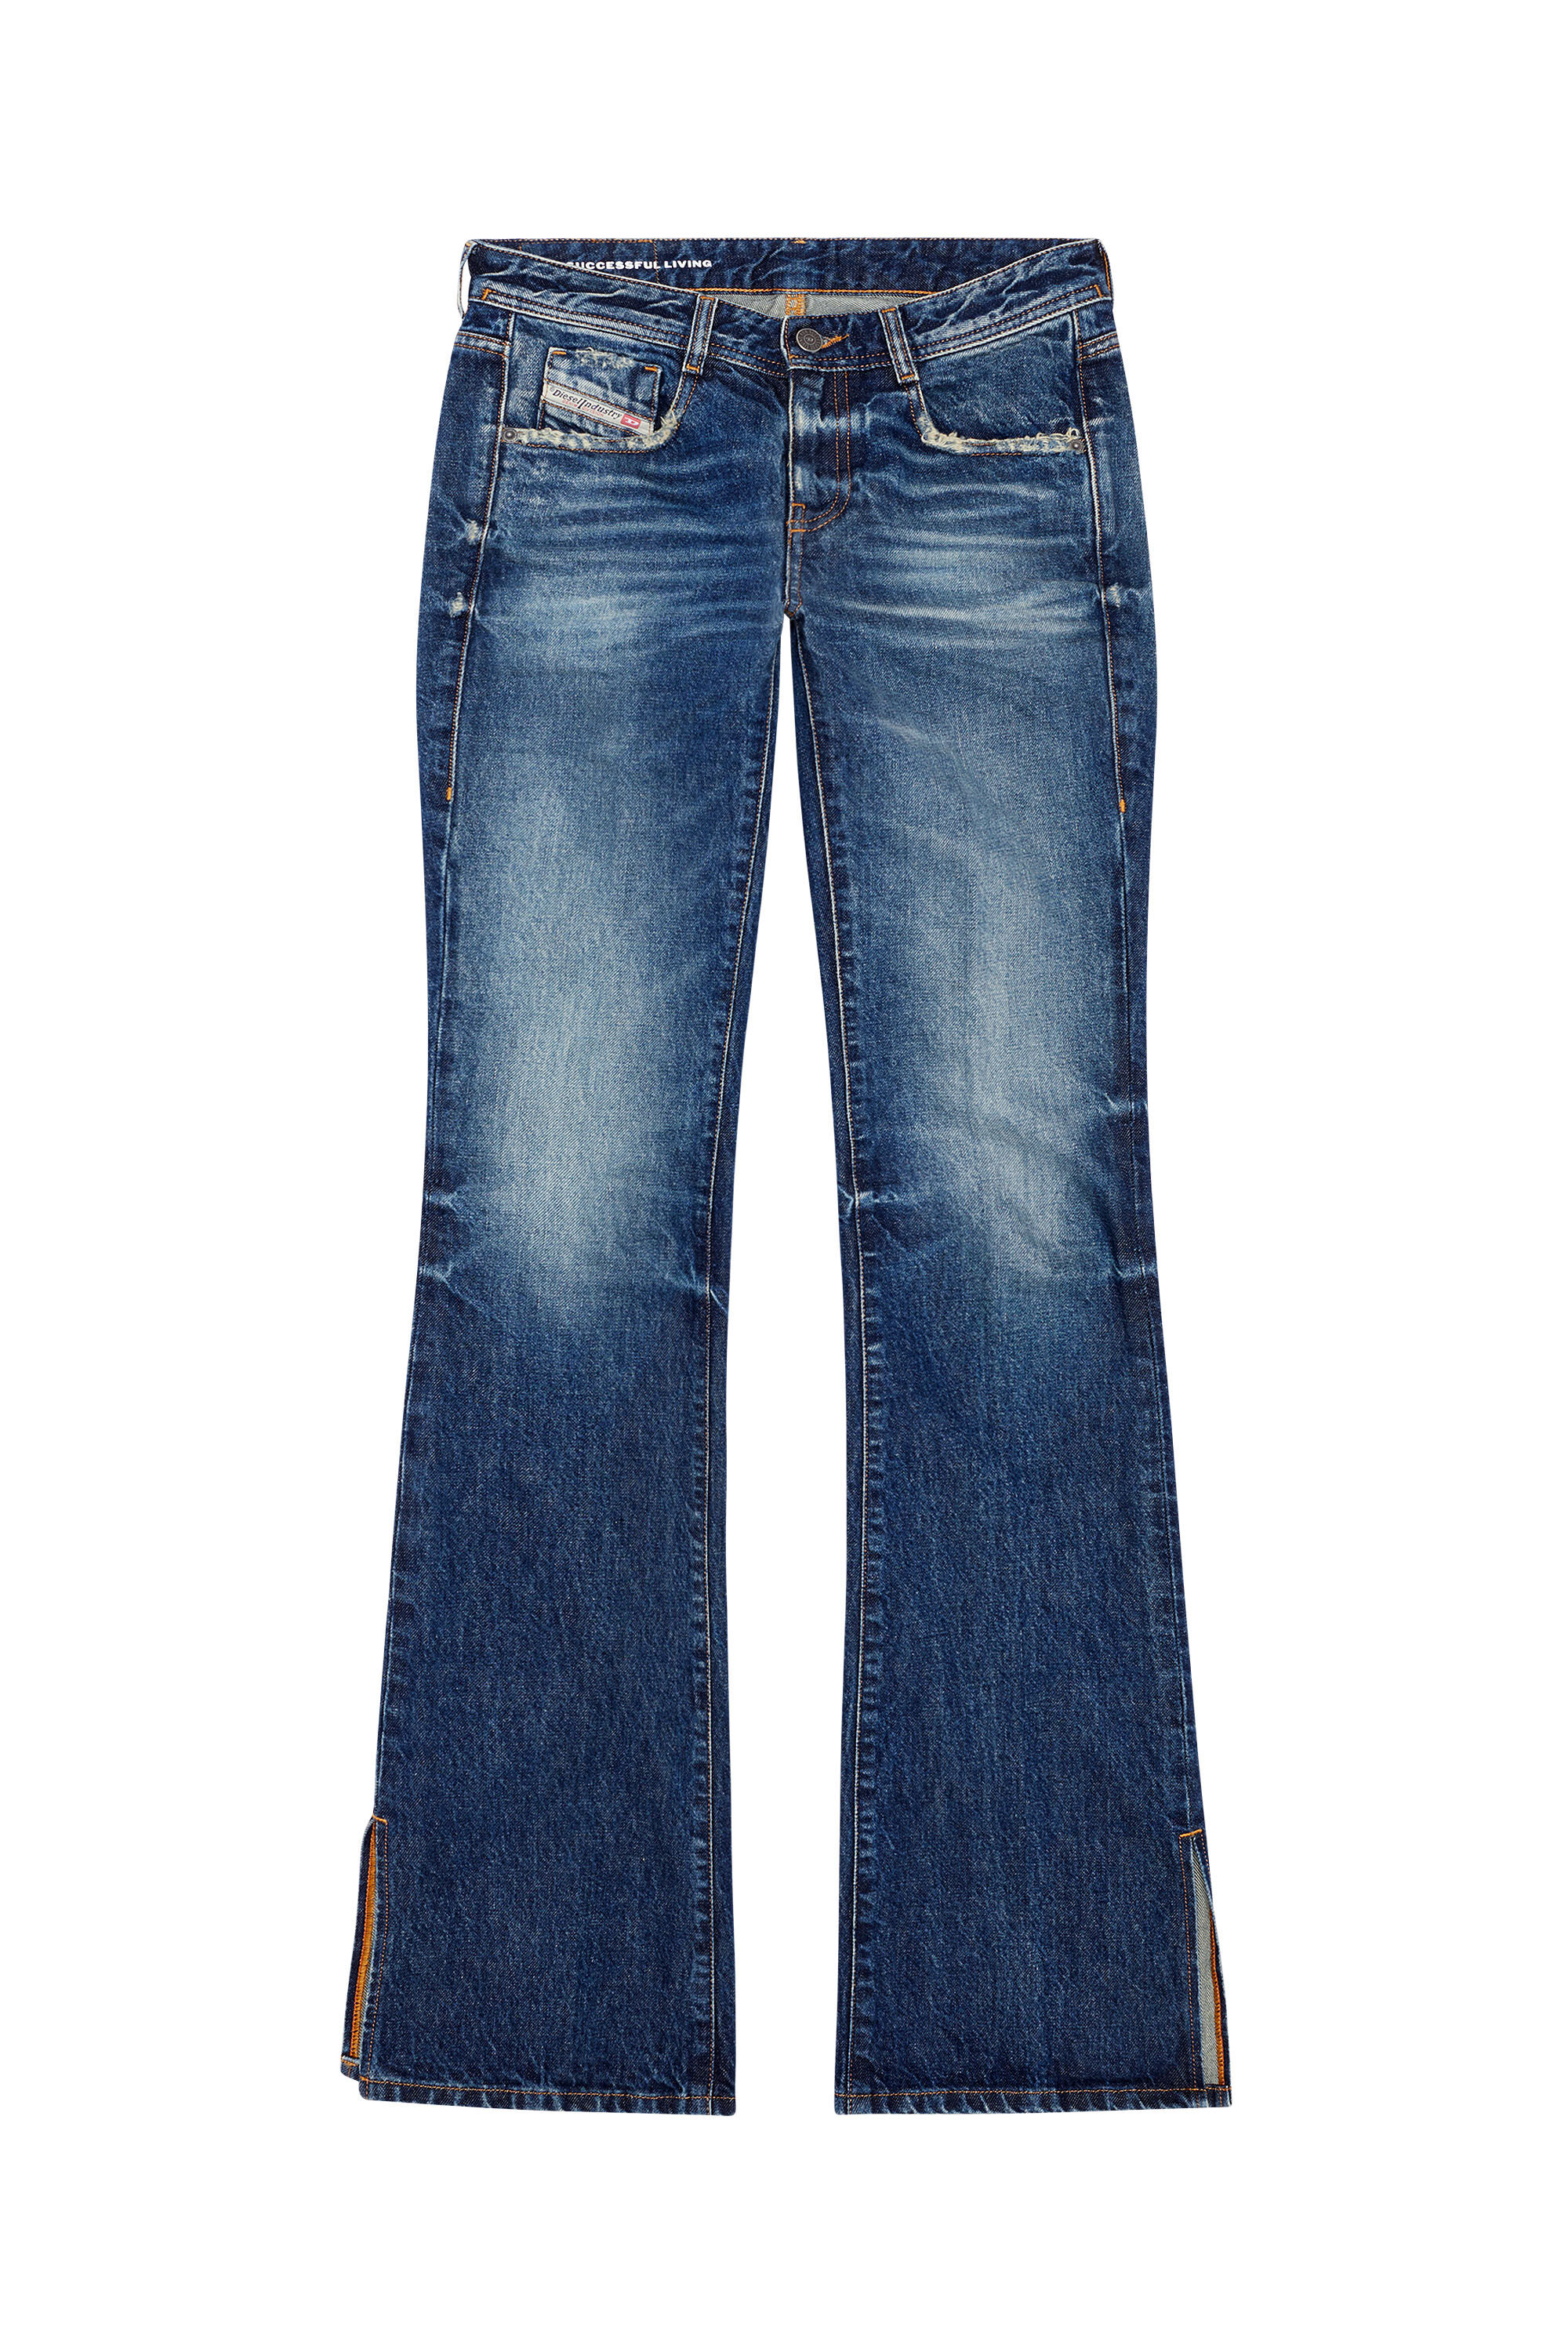 Bootcut and Flare Jeans 1969 D-Ebbey 09B90